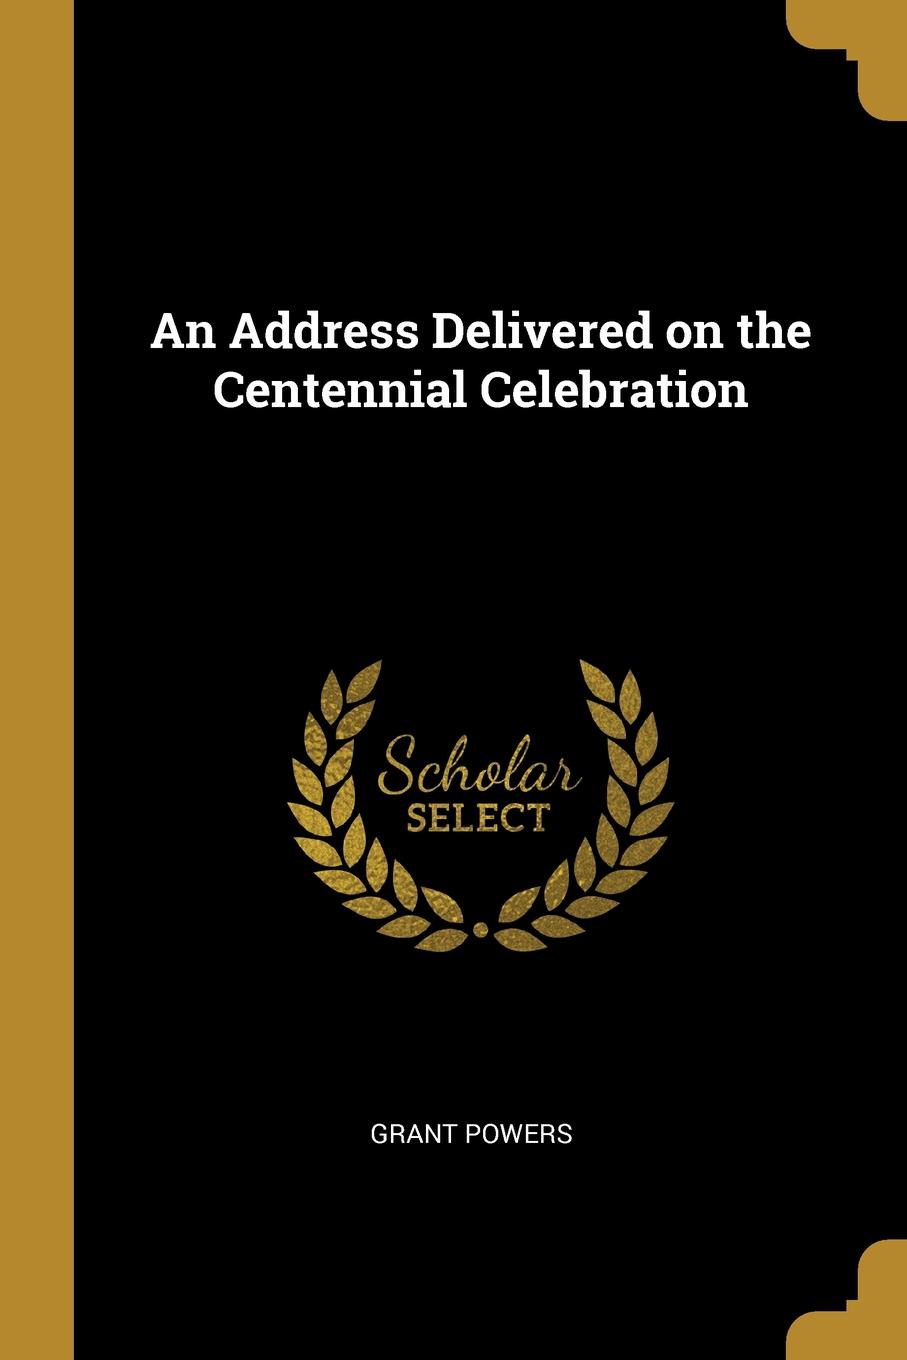 An Address Delivered on the Centennial Celebration